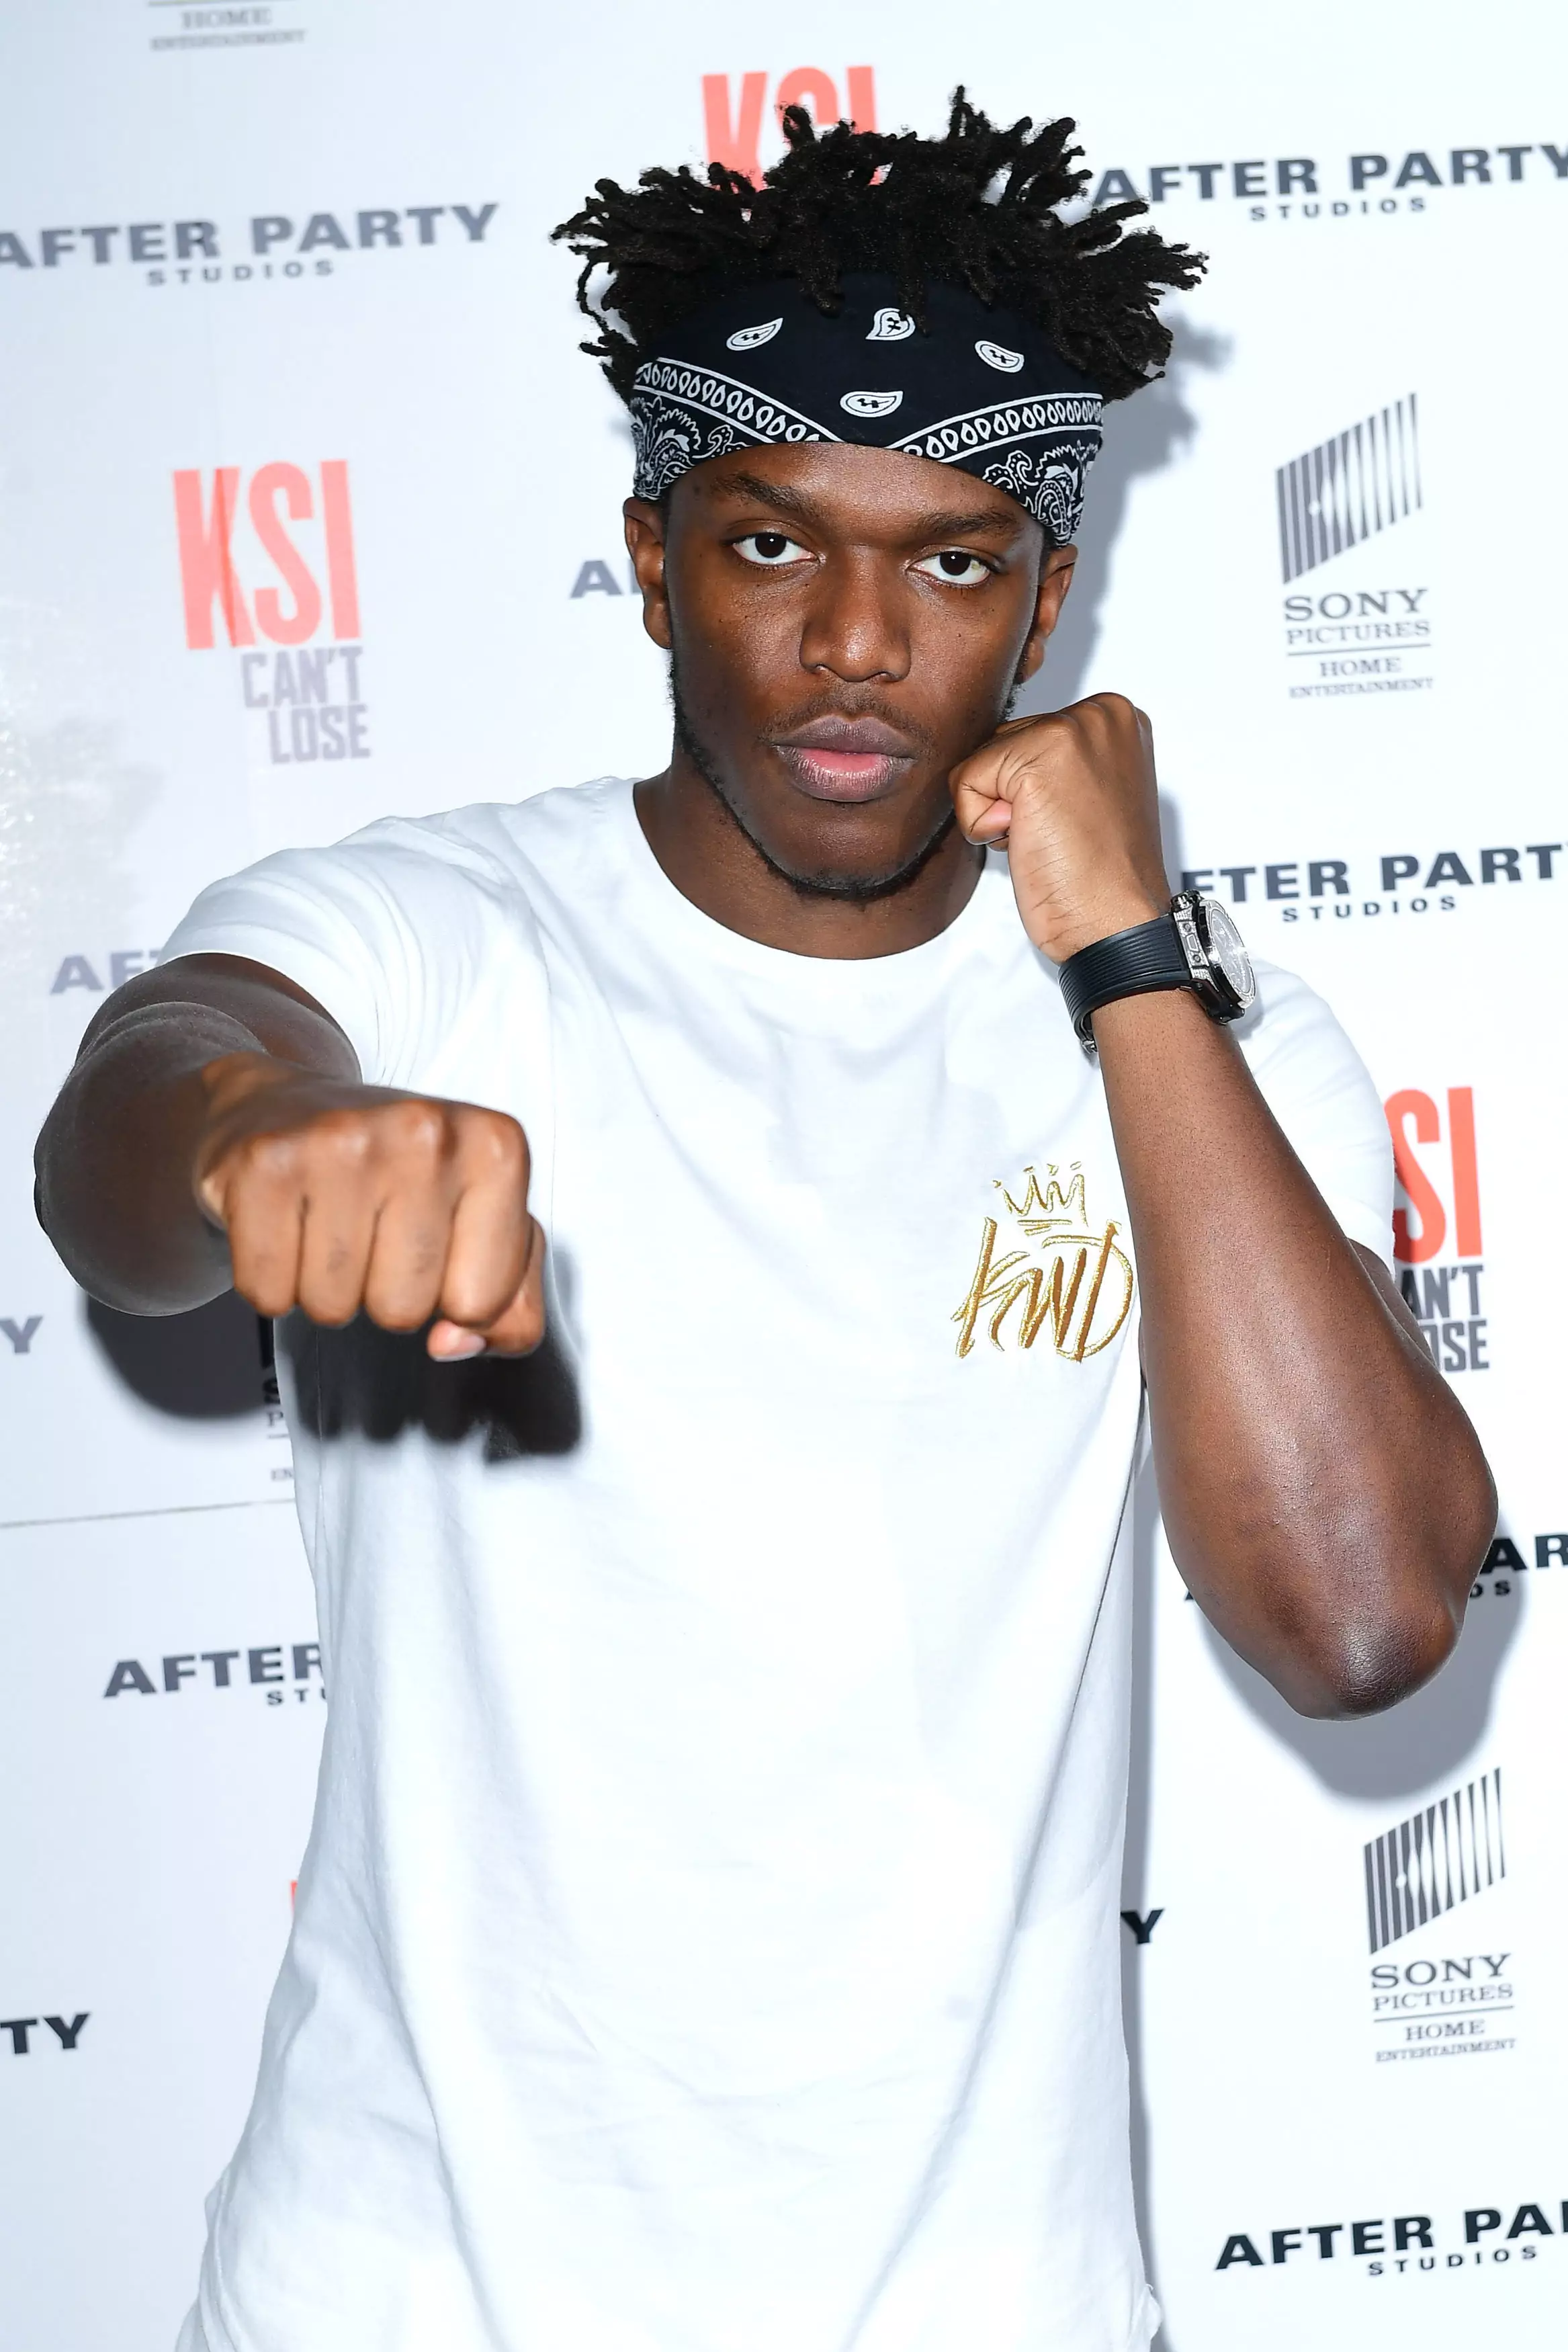 KSI admitted that he's 'rich as hell' following last year's fight with online rival, Logan Paul.